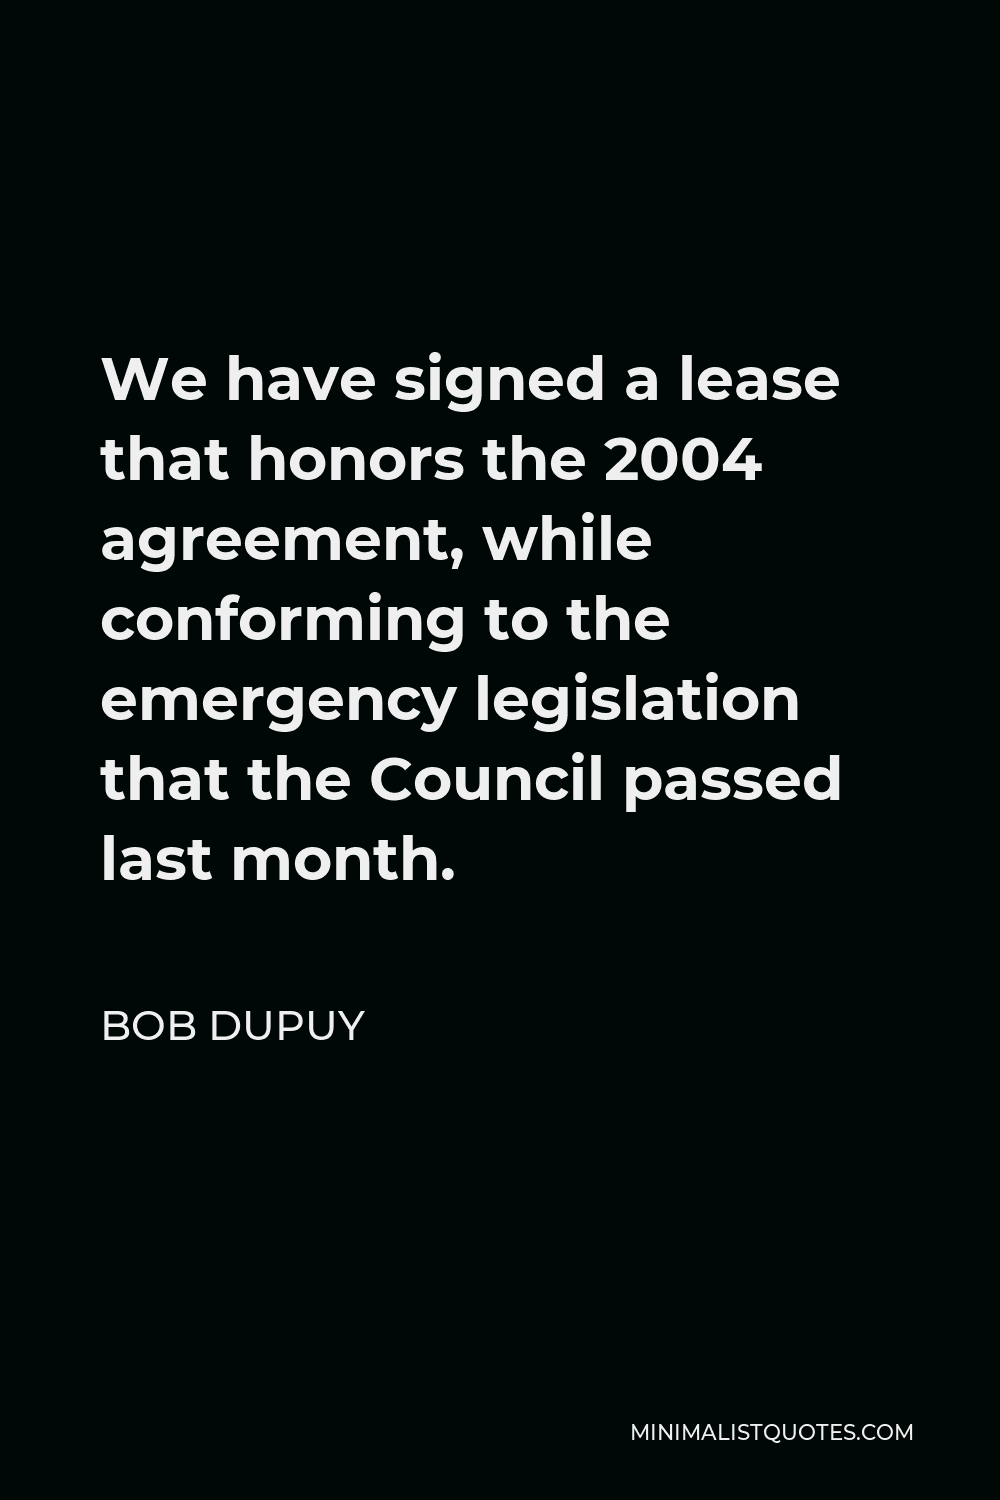 Bob DuPuy Quote - We have signed a lease that honors the 2004 agreement, while conforming to the emergency legislation that the Council passed last month.